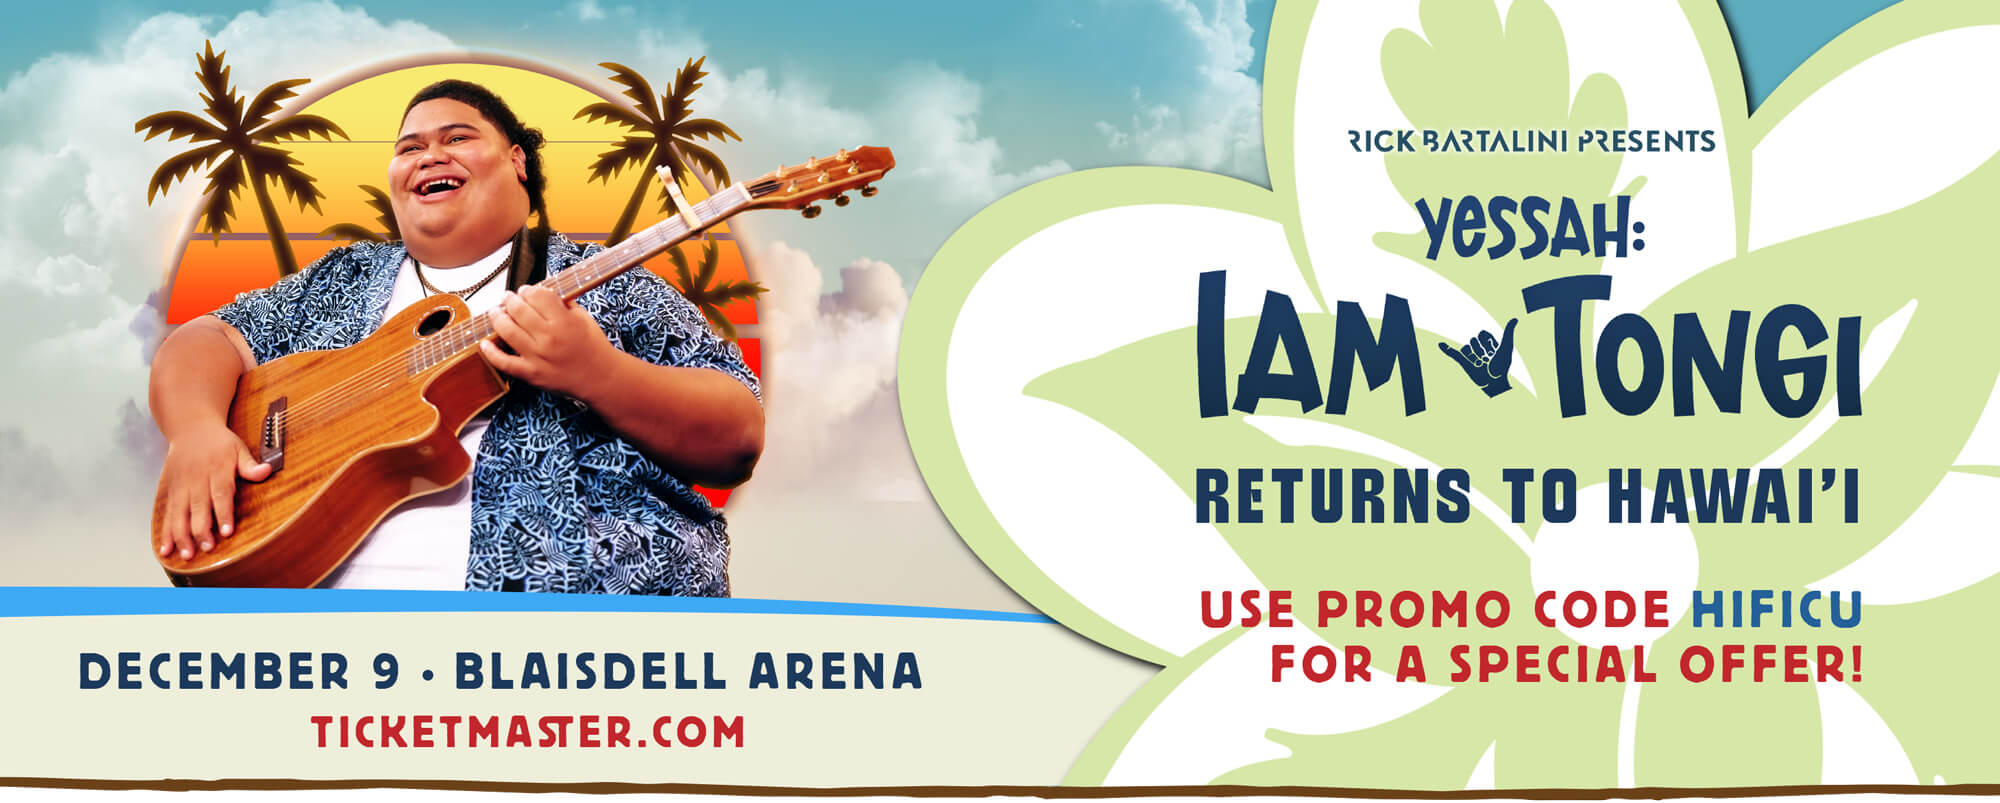 Iam Tongi Returns to Hawaii!  Use promo code HIFICU for a special offer!